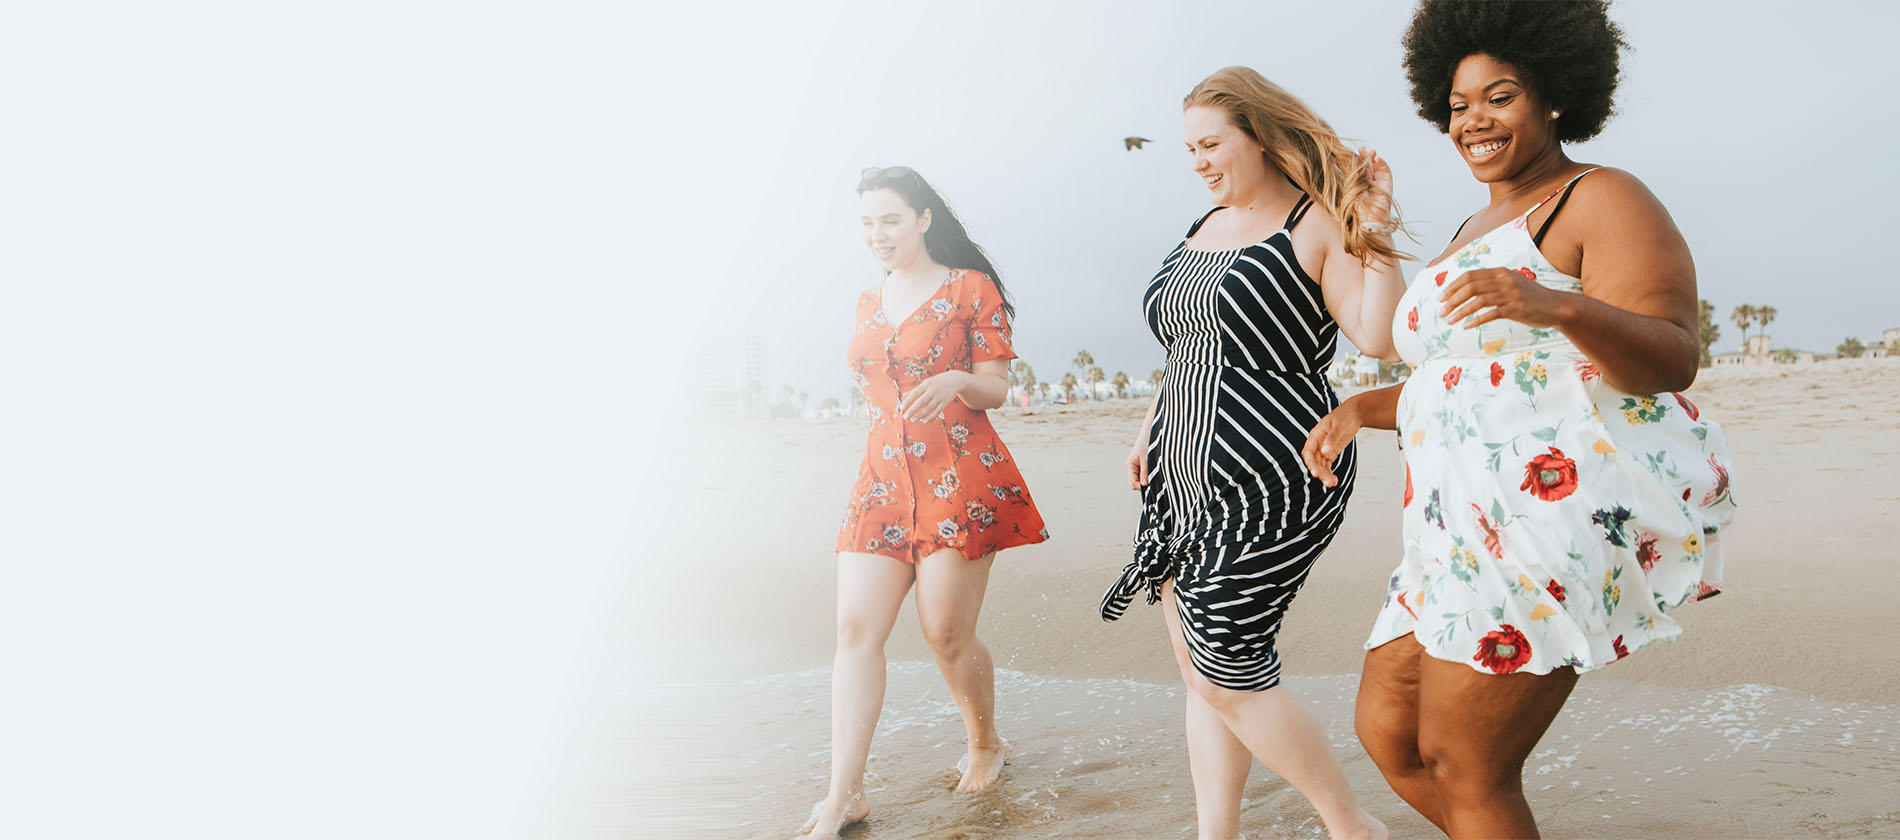 Group of women on beach that may consider weight loss surgery